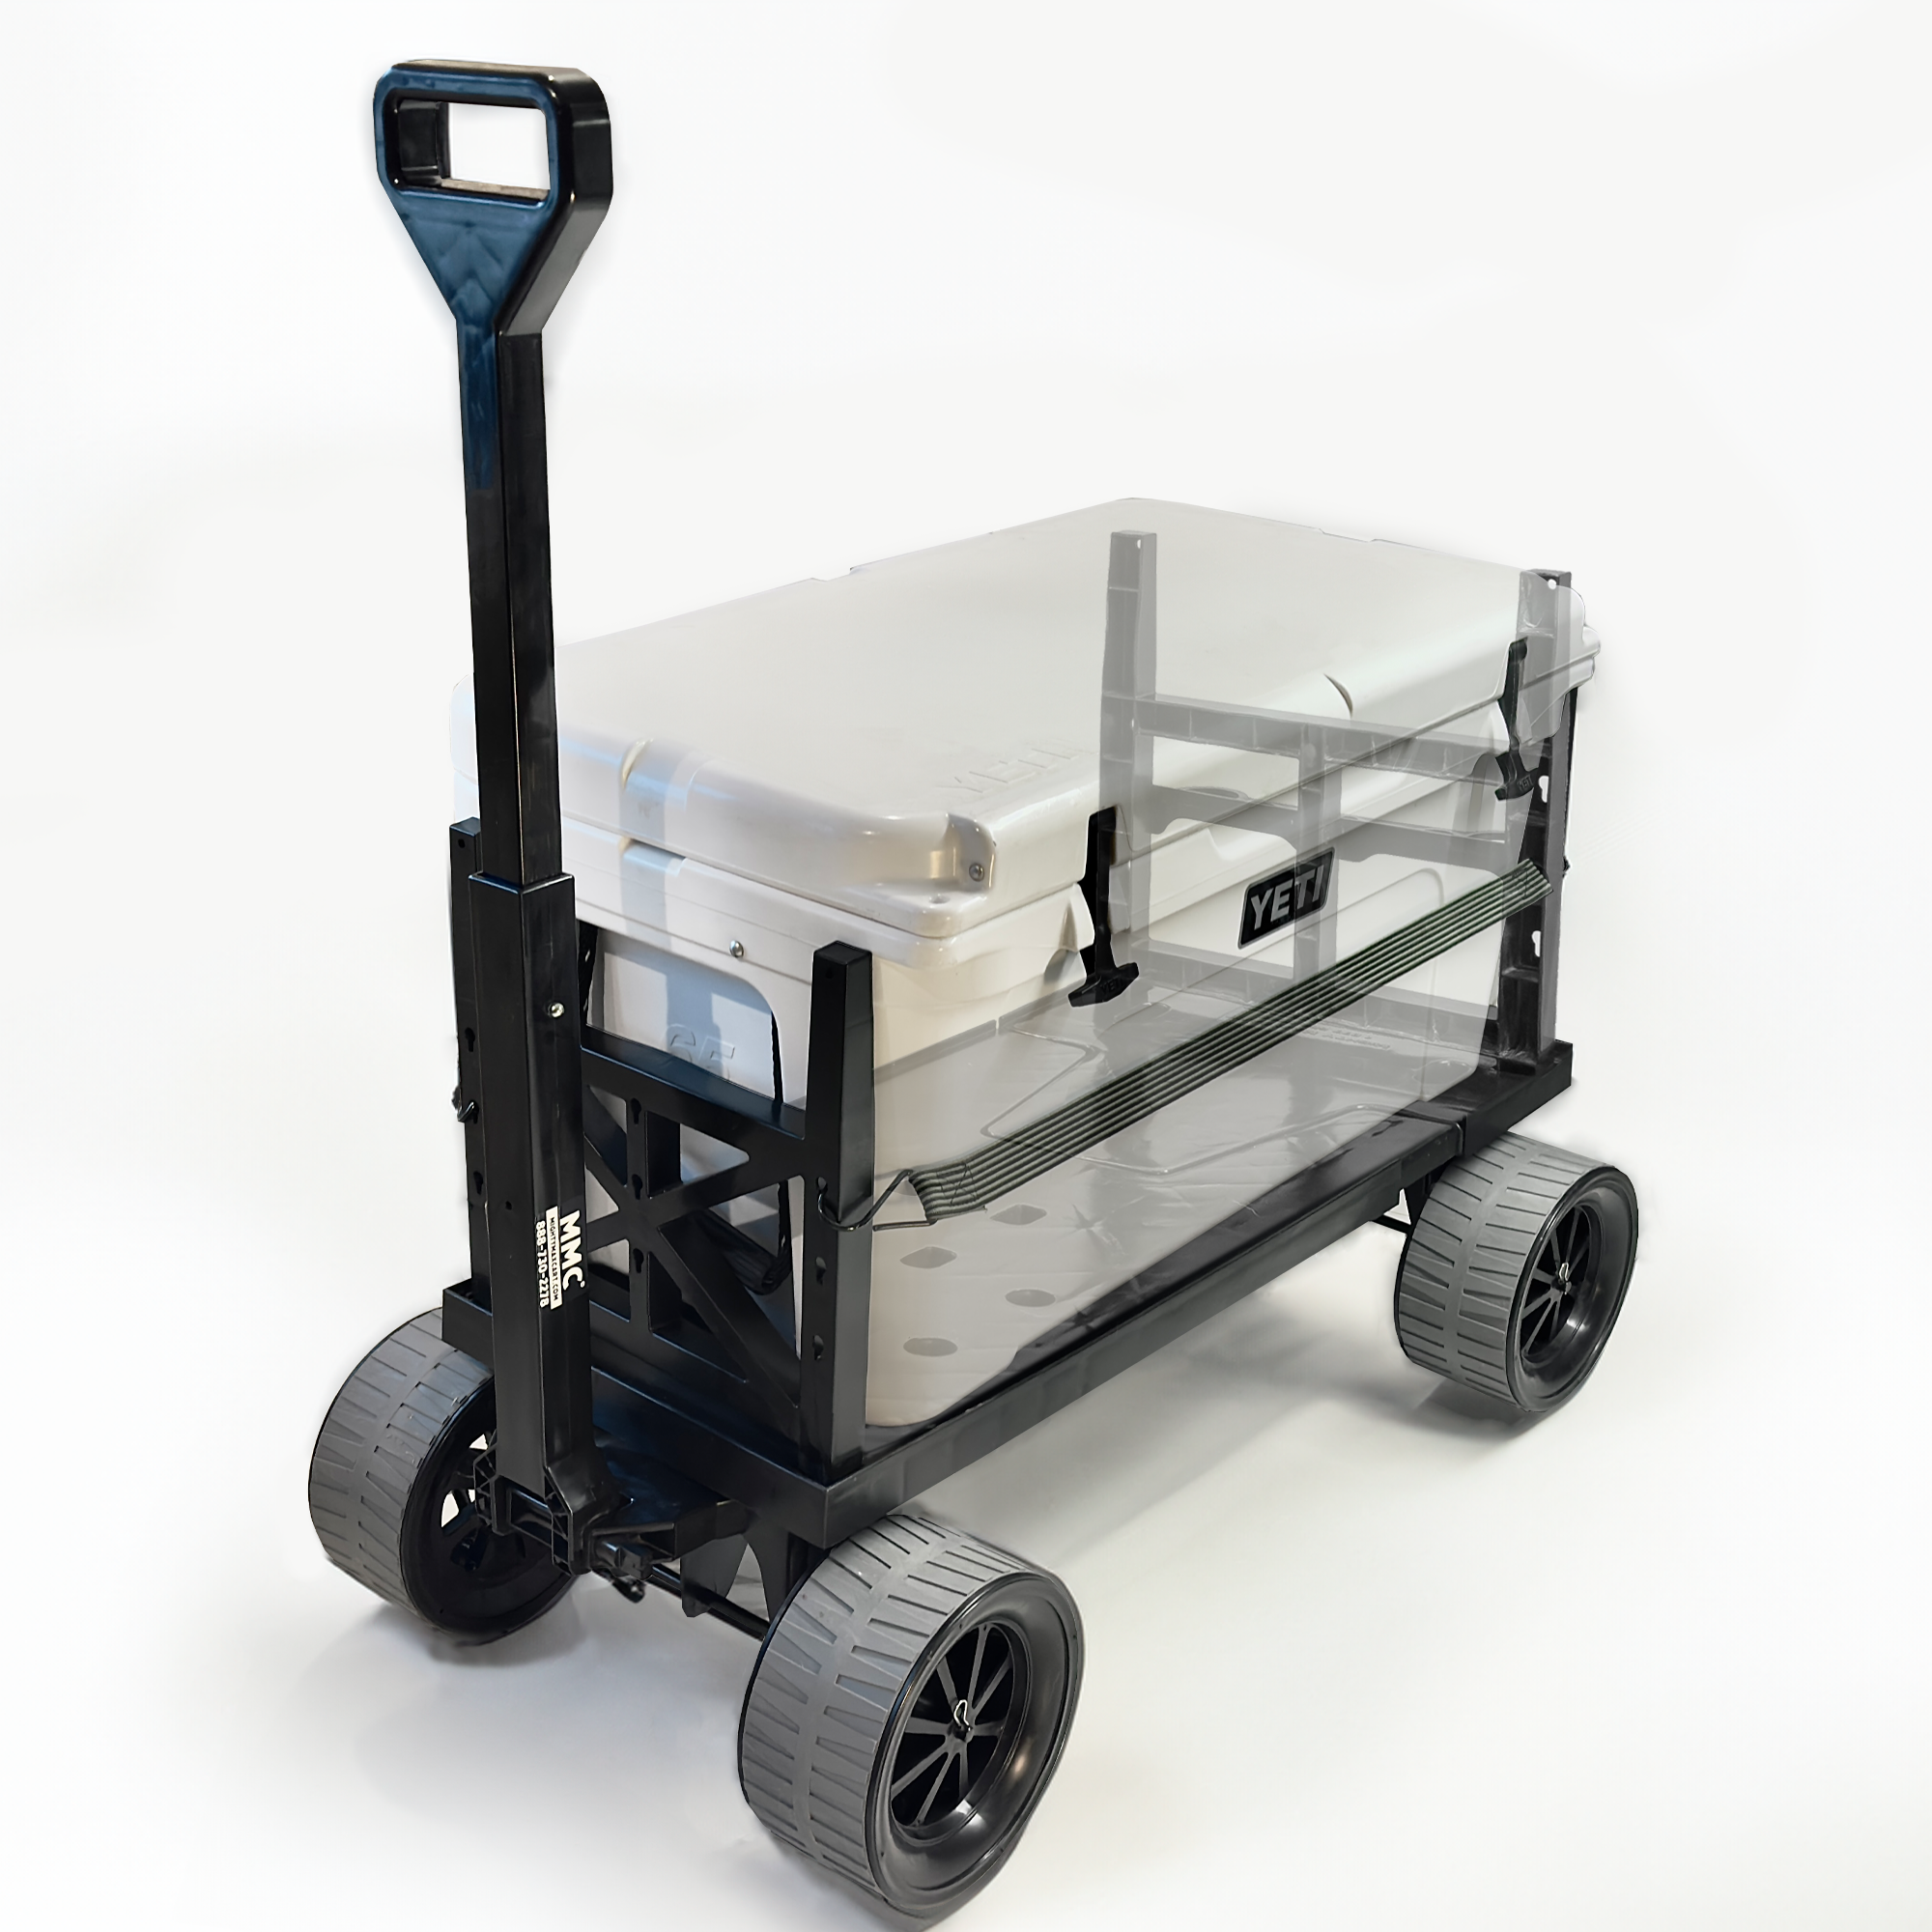 Dolly Cart with Wheels｜660 lbs Weight Capacity Flatbed Cart｜Push